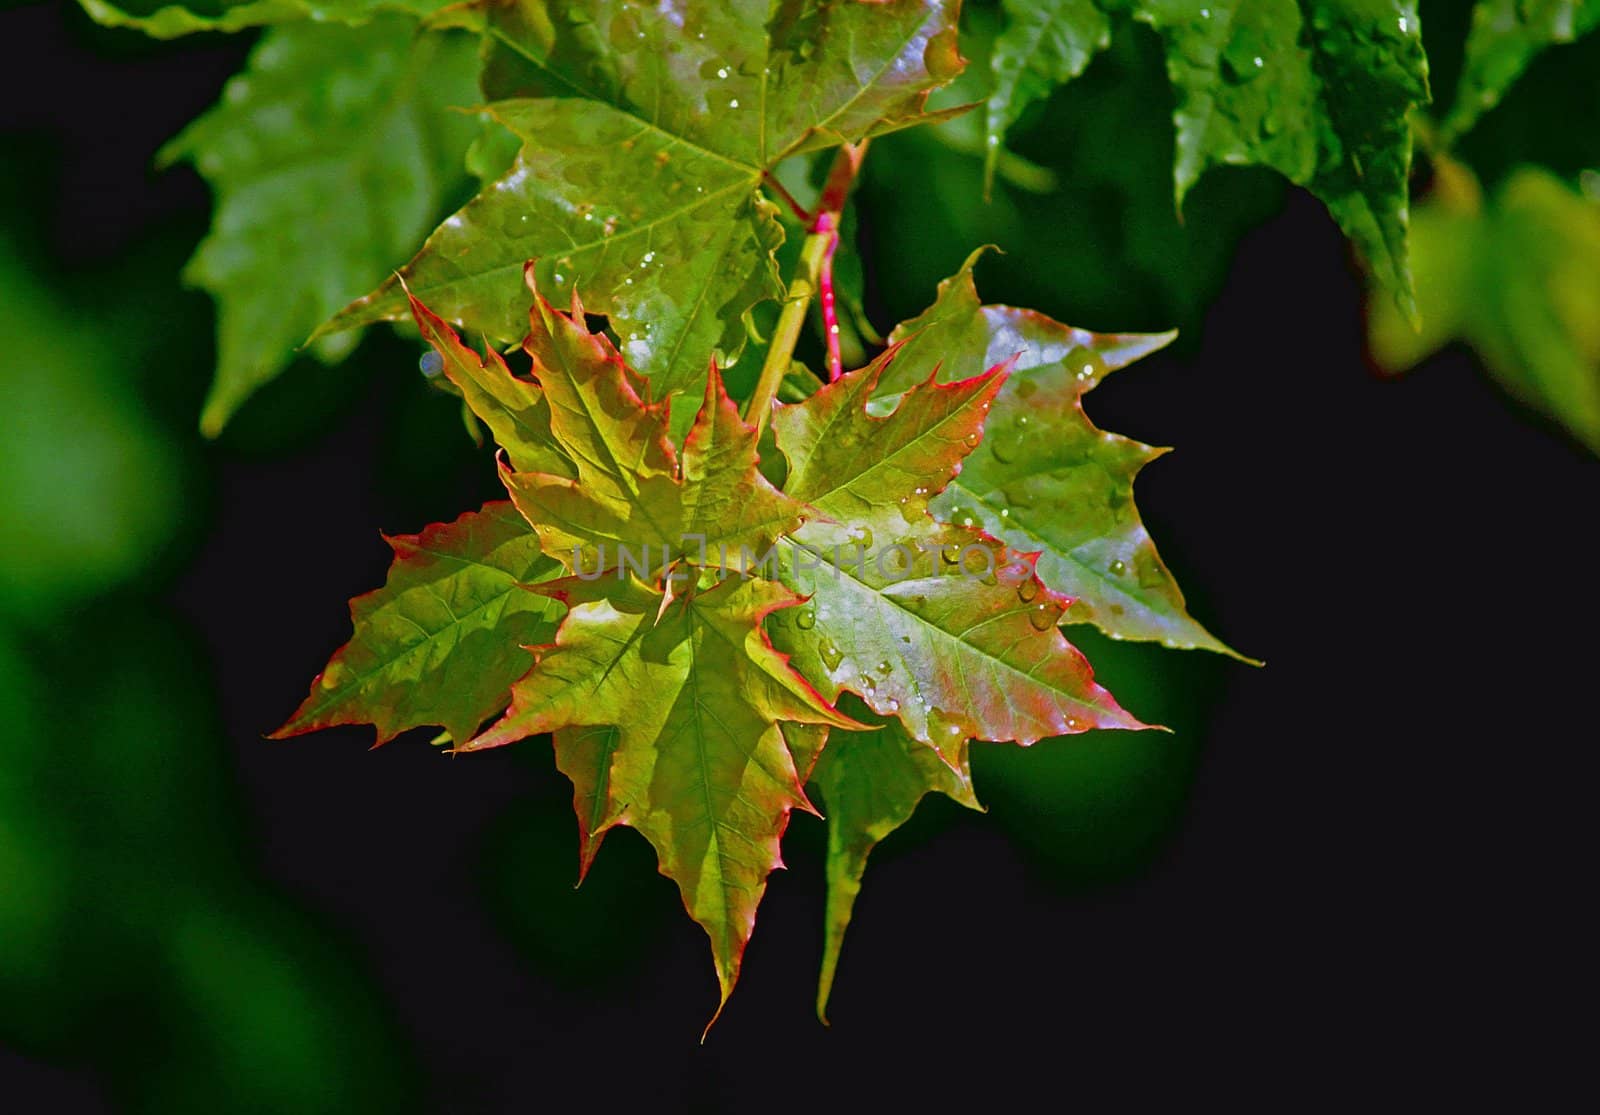 Immature maple leaves are wet with the droops after raining